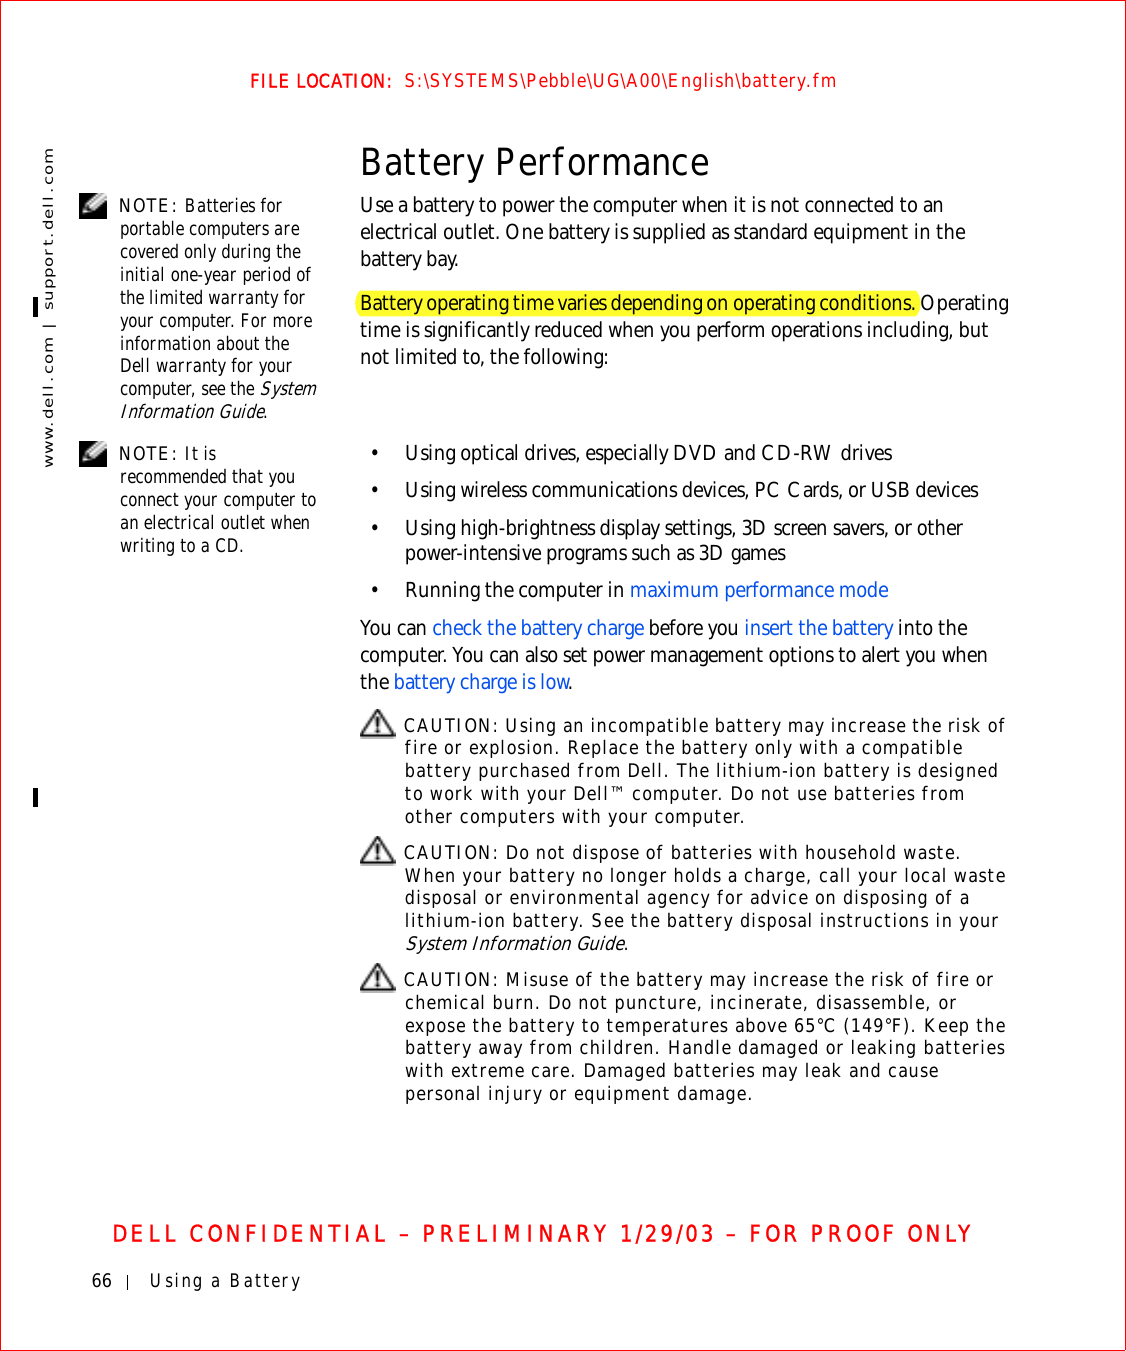 66 Using a Batterywww.dell.com | support.dell.comFILE LOCATION:  S:\SYSTEMS\Pebble\UG\A00\English\battery.fmDELL CONFIDENTIAL – PRELIMINARY 1/29/03 – FOR PROOF ONLYBattery Performance NOTE: Batteries for portable computers are covered only during the initial one-year period of the limited warranty for your computer. For more information about the Dell warranty for your computer, see the System Information Guide.Use a battery to power the computer when it is not connected to an electrical outlet. One battery is supplied as standard equipment in the battery bay.Battery operating time varies depending on operating conditions. Operating time is significantly reduced when you perform operations including, but not limited to, the following: NOTE: It is recommended that you connect your computer to an electrical outlet when writing to a CD.• Using optical drives, especially DVD and CD-RW drives• Using wireless communications devices, PC Cards, or USB devices• Using high-brightness display settings, 3D screen savers, or other power-intensive programs such as 3D games• Running the computer in maximum performance modeYou can check the battery charge before you insert the battery into the computer. You can also set power management options to alert you when the battery charge is low. CAUTION: Using an incompatible battery may increase the risk of fire or explosion. Replace the battery only with a compatible battery purchased from Dell. The lithium-ion battery is designed to work with your Dell™ computer. Do not use batteries from other computers with your computer.  CAUTION: Do not dispose of batteries with household waste. When your battery no longer holds a charge, call your local waste disposal or environmental agency for advice on disposing of a lithium-ion battery. See the battery disposal instructions in your System Information Guide. CAUTION: Misuse of the battery may increase the risk of fire or chemical burn. Do not puncture, incinerate, disassemble, or expose the battery to temperatures above 65°C (149°F). Keep the battery away from children. Handle damaged or leaking batteries with extreme care. Damaged batteries may leak and cause personal injury or equipment damage. 